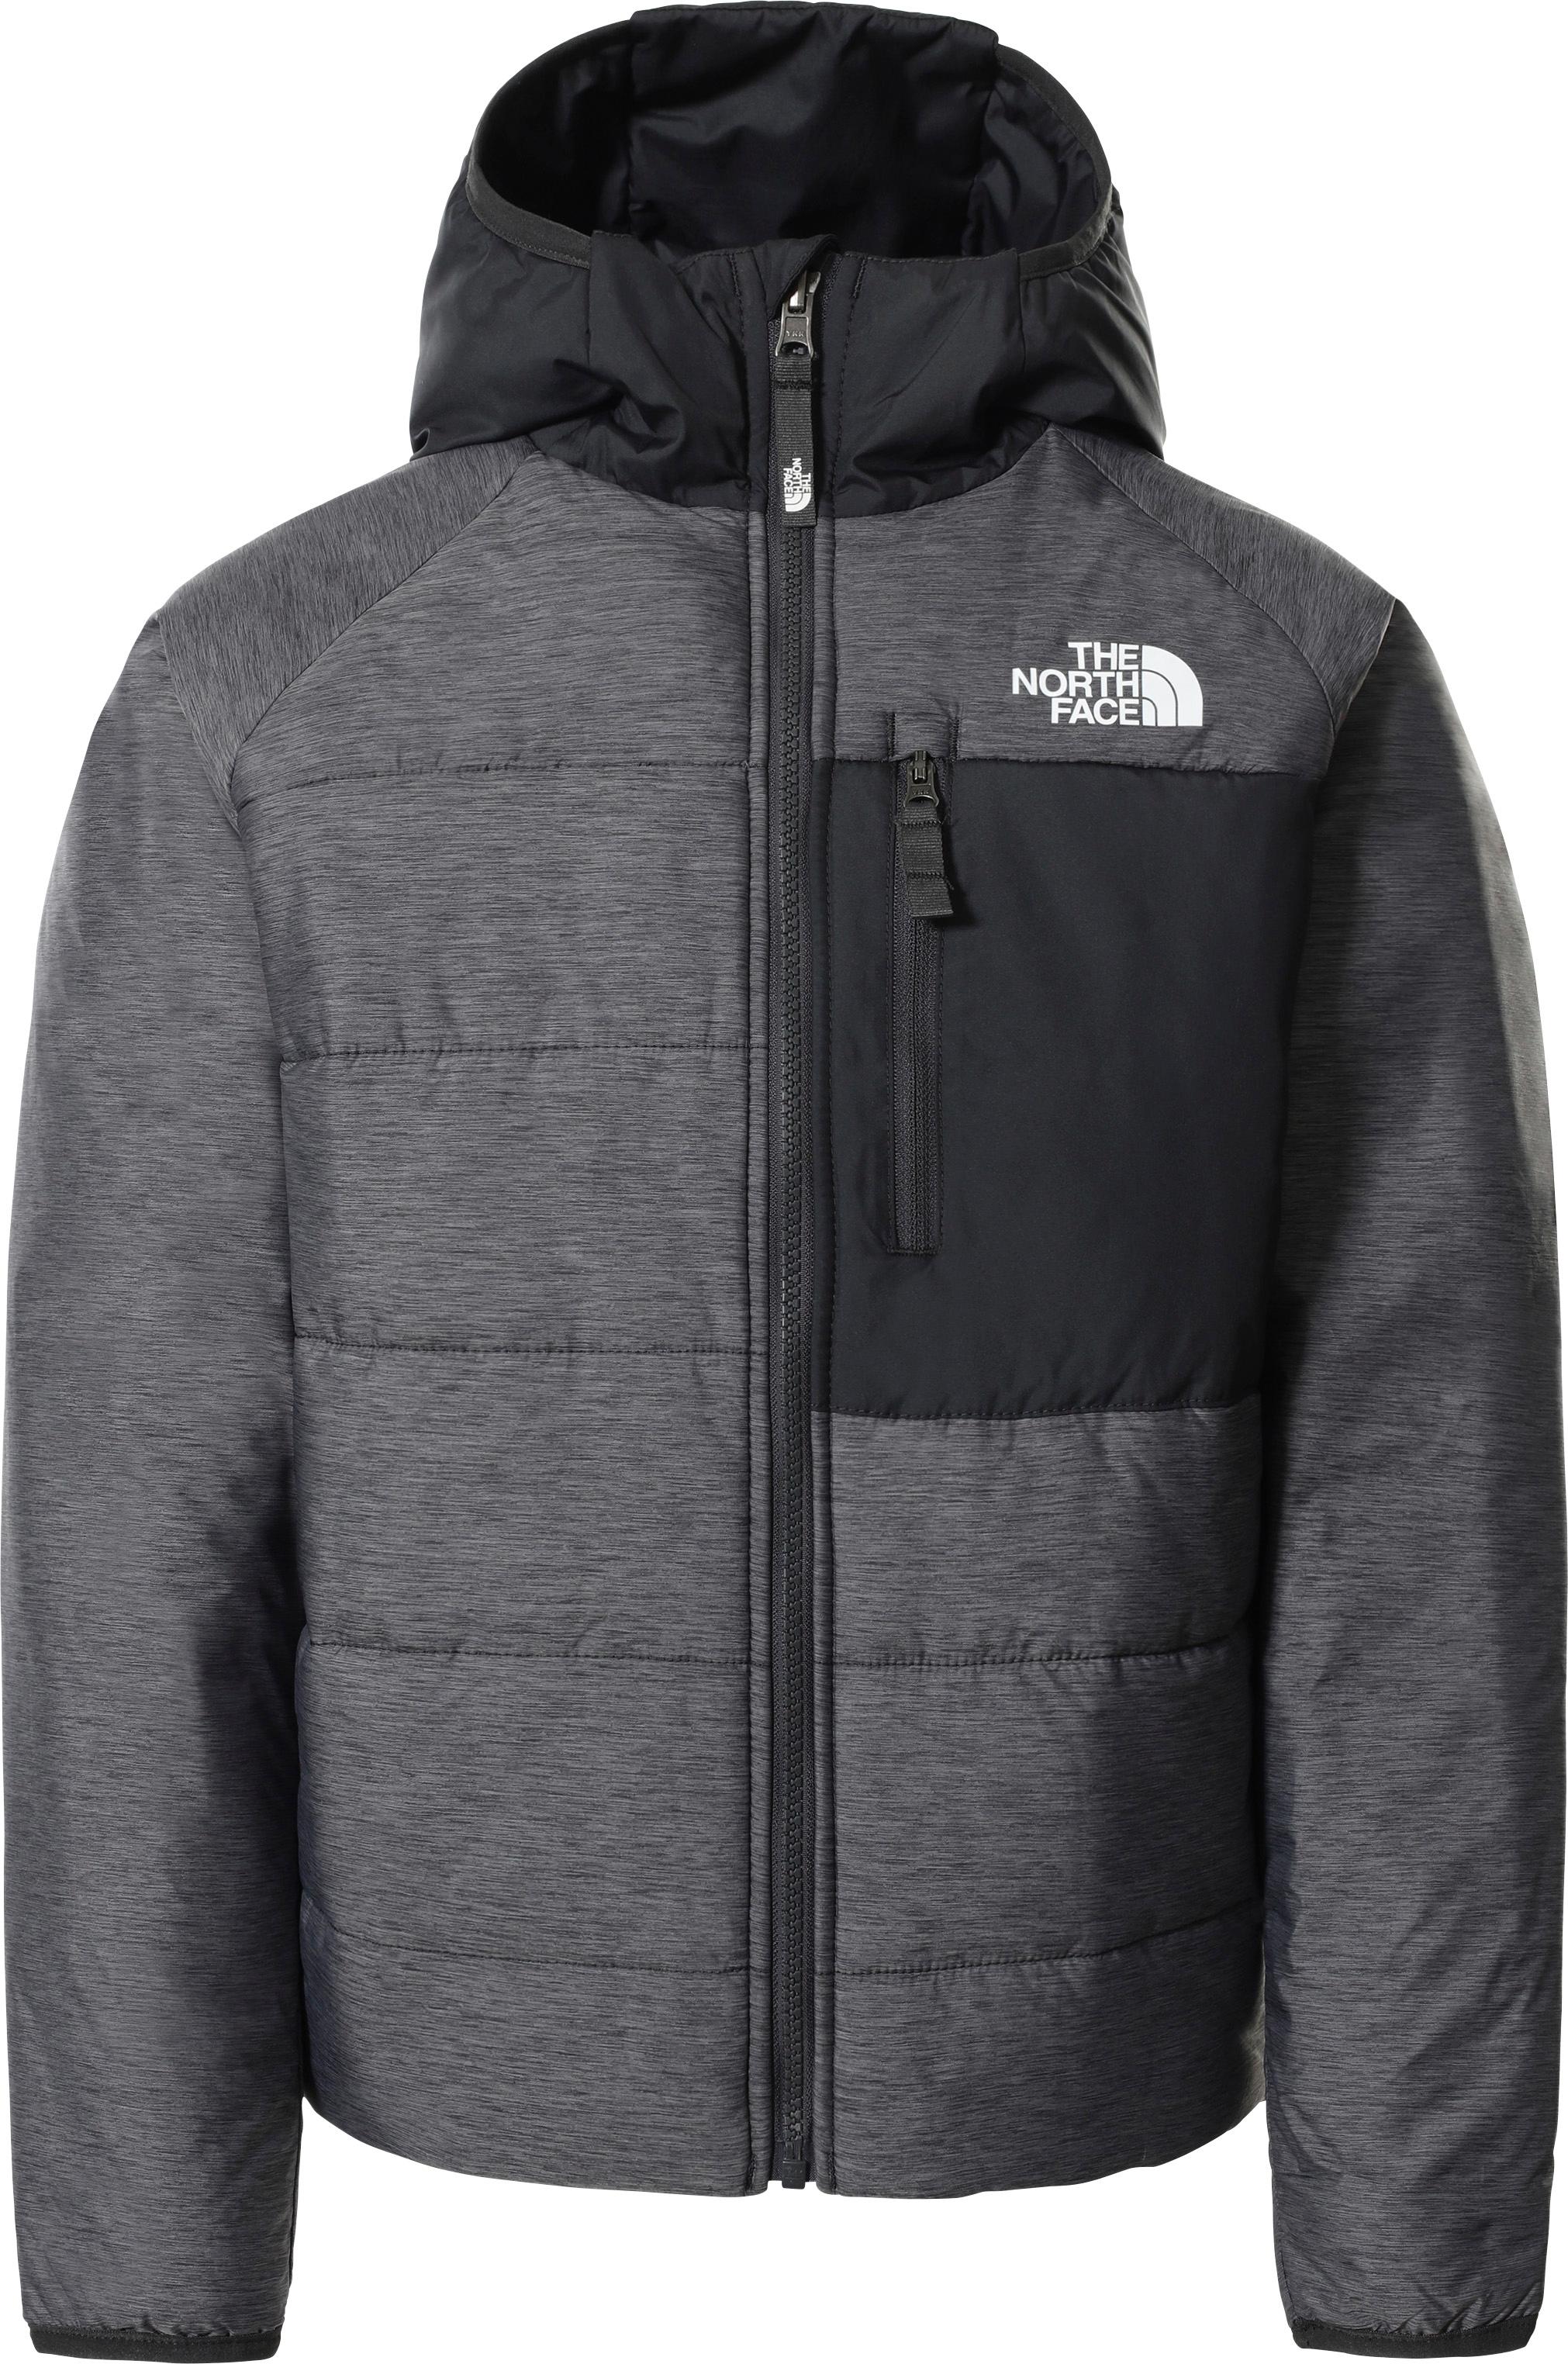 Image of The North Face REVERSIBLE PERRITO Wendejacke Jungen